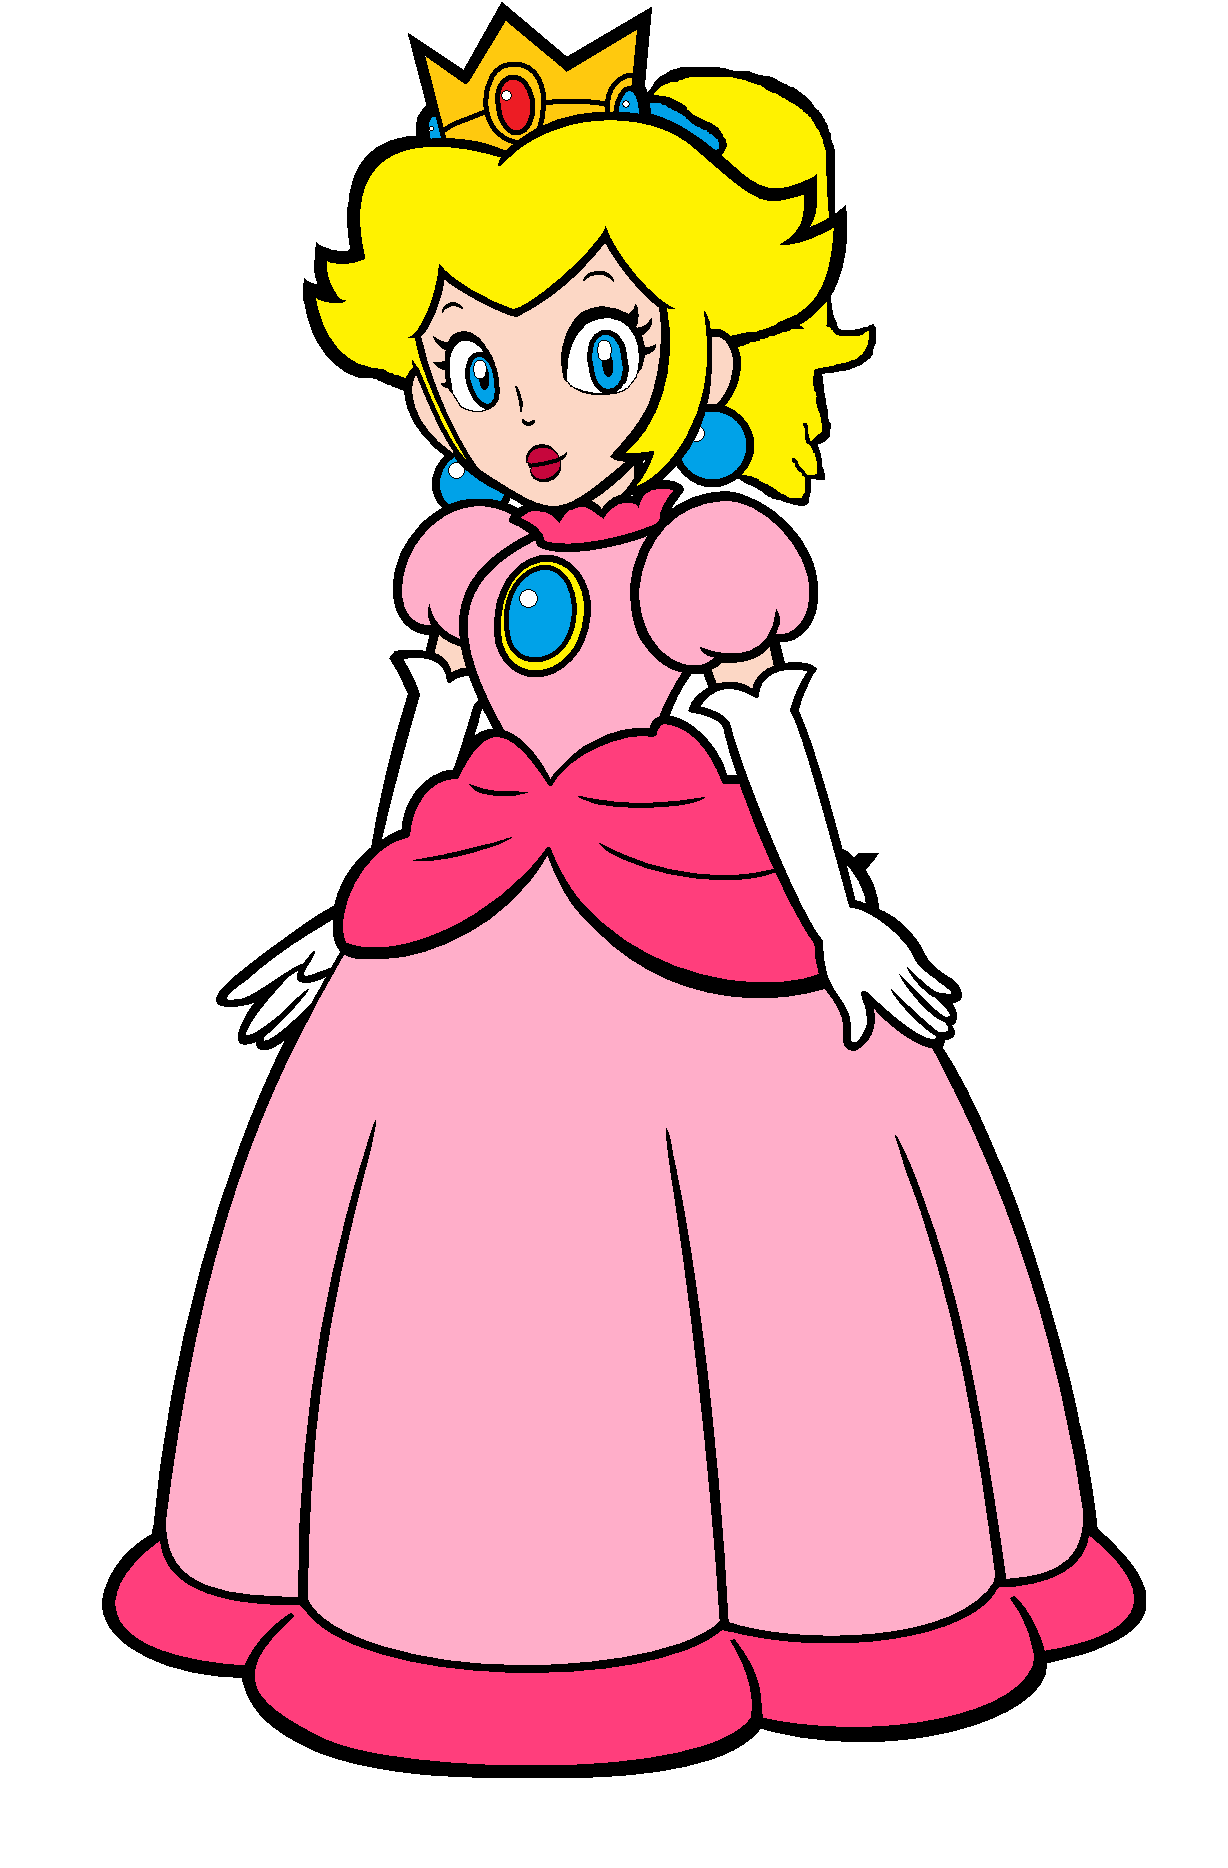 Image - Princess Peach.png | Animated Spinning Wiki | FANDOM powered by ...